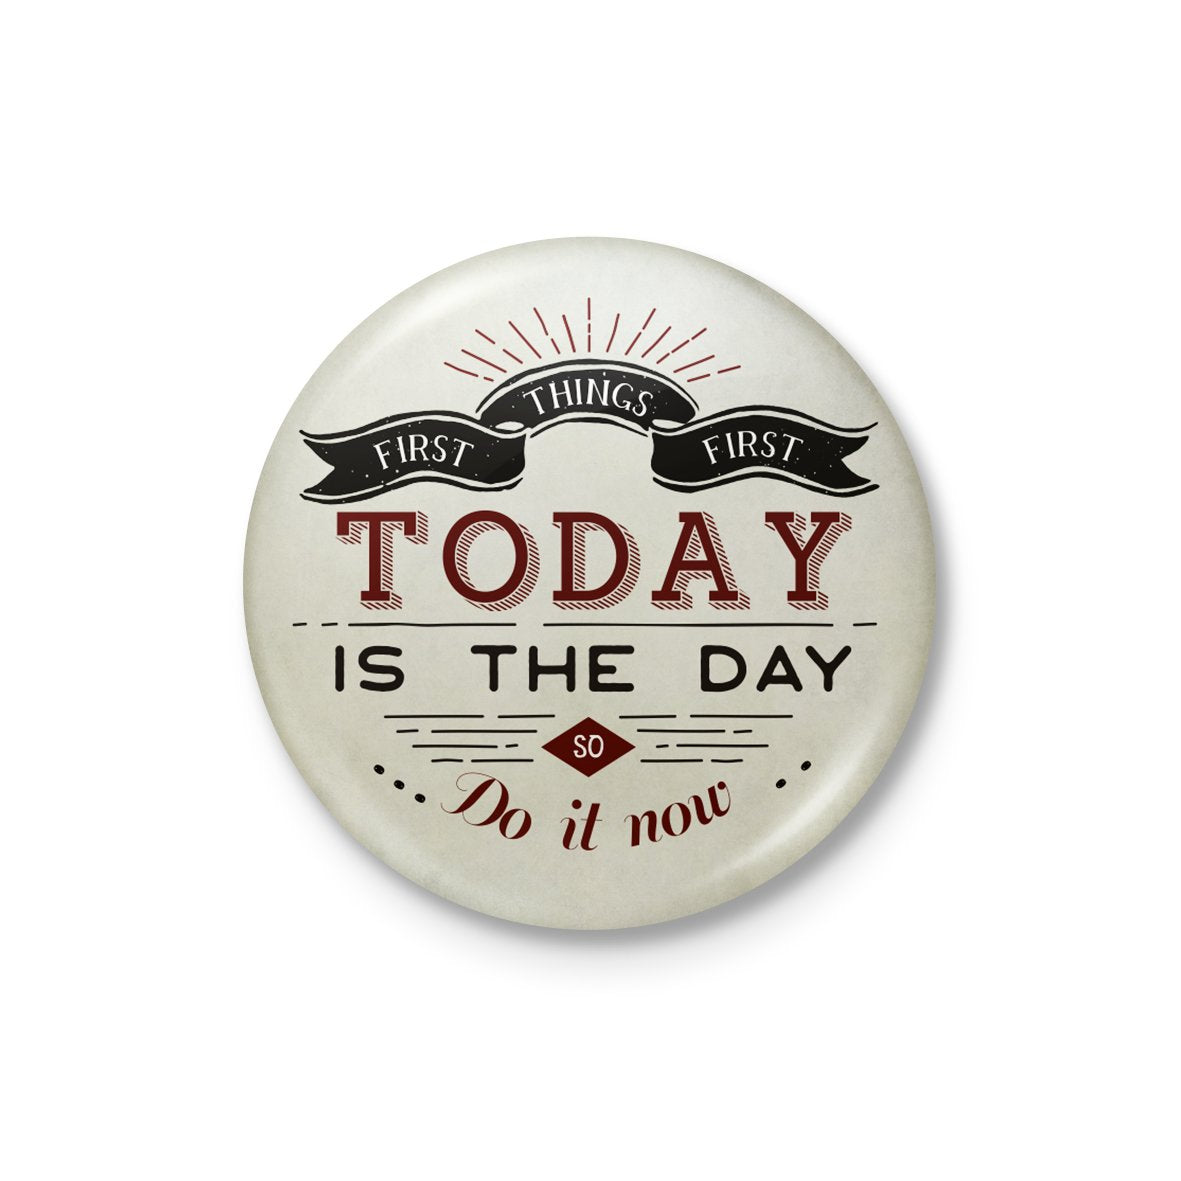 Today is the Day Badge